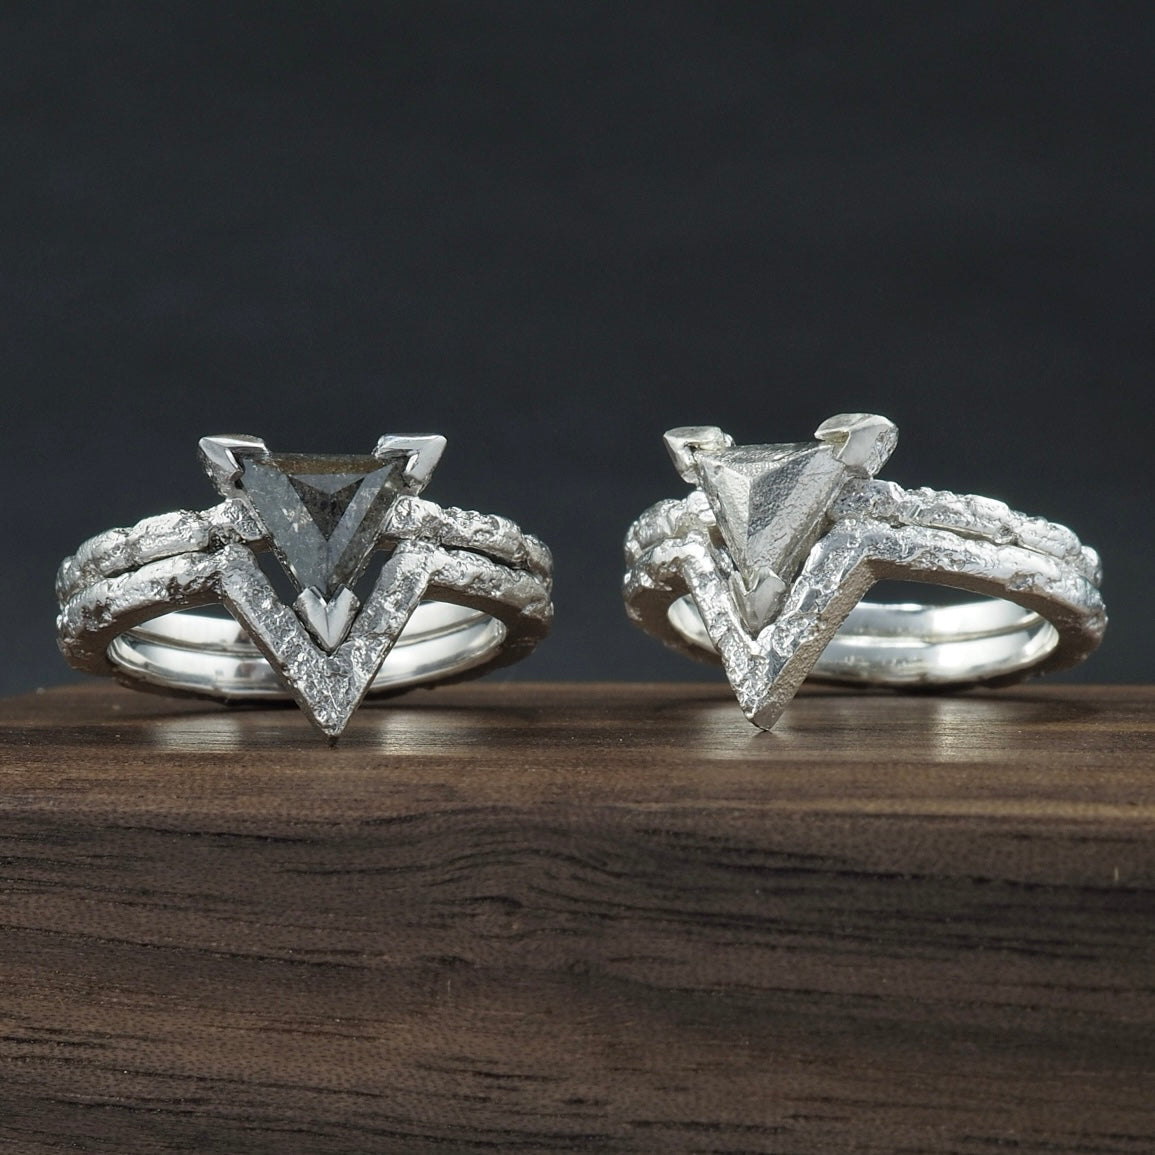 Crater engagement and wedding ring set, random texture that evoke thoughts of ruins, set with a triangle salt and pepper diamond